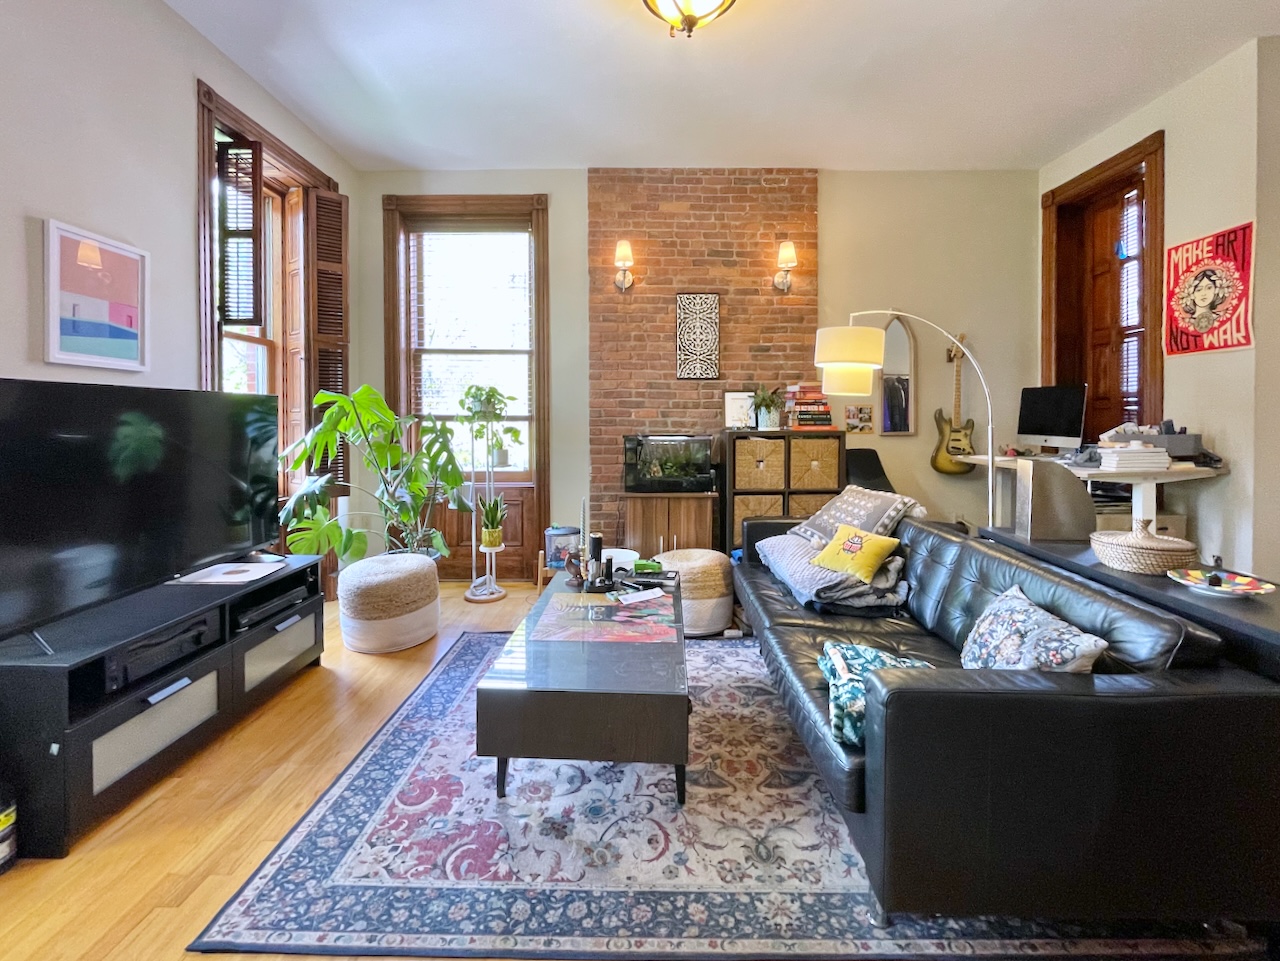 Located right around the corner from Van Vorst Park and just a few blocks from the Grove St PATH station, this spacious home is on the second floor (one flight up) of a beautiful historic brownstone home. Modern amenities such as washer/dryer in-unit, central air (heating and cooling), dishwasher, alongside historic charm such as exposed brick, wood shutters, hardwood floors, and more exposed brick, you get the best of both worlds. Available as soon as late May. Call today to schedule your in-person tour and also ask for the virtual tour!